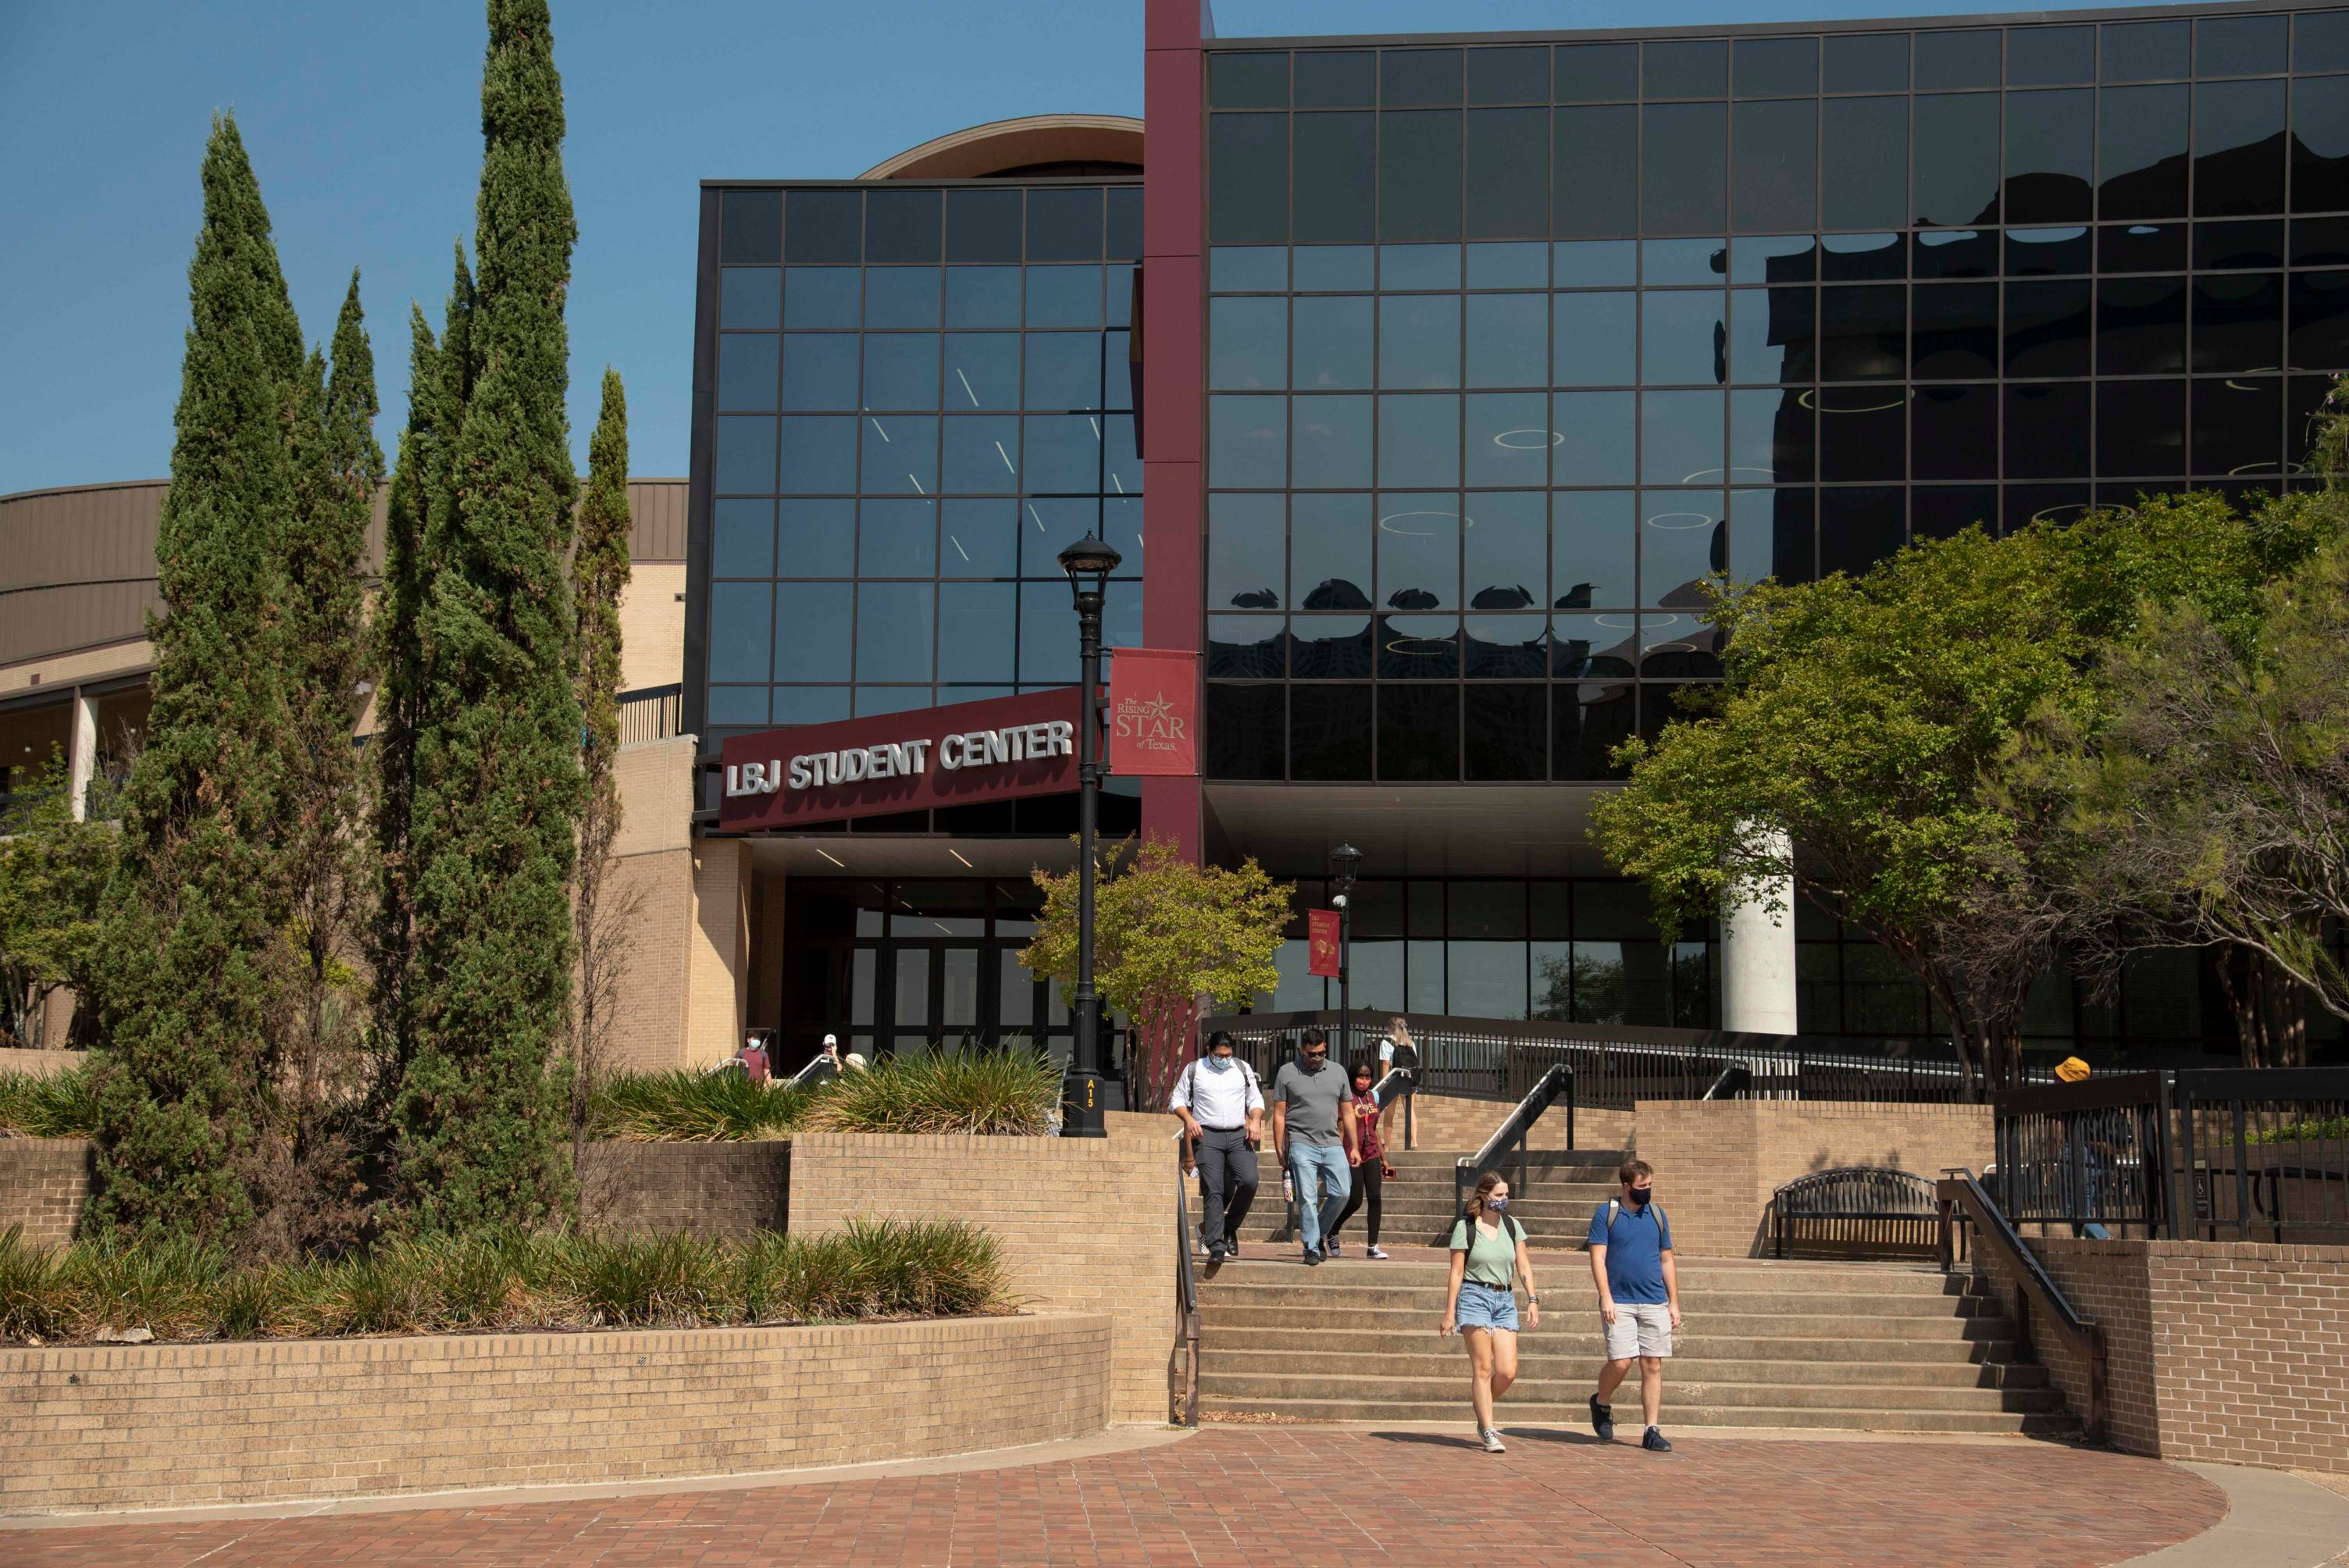 the front exterior of the LBJ student center with several students walking up and down the steps